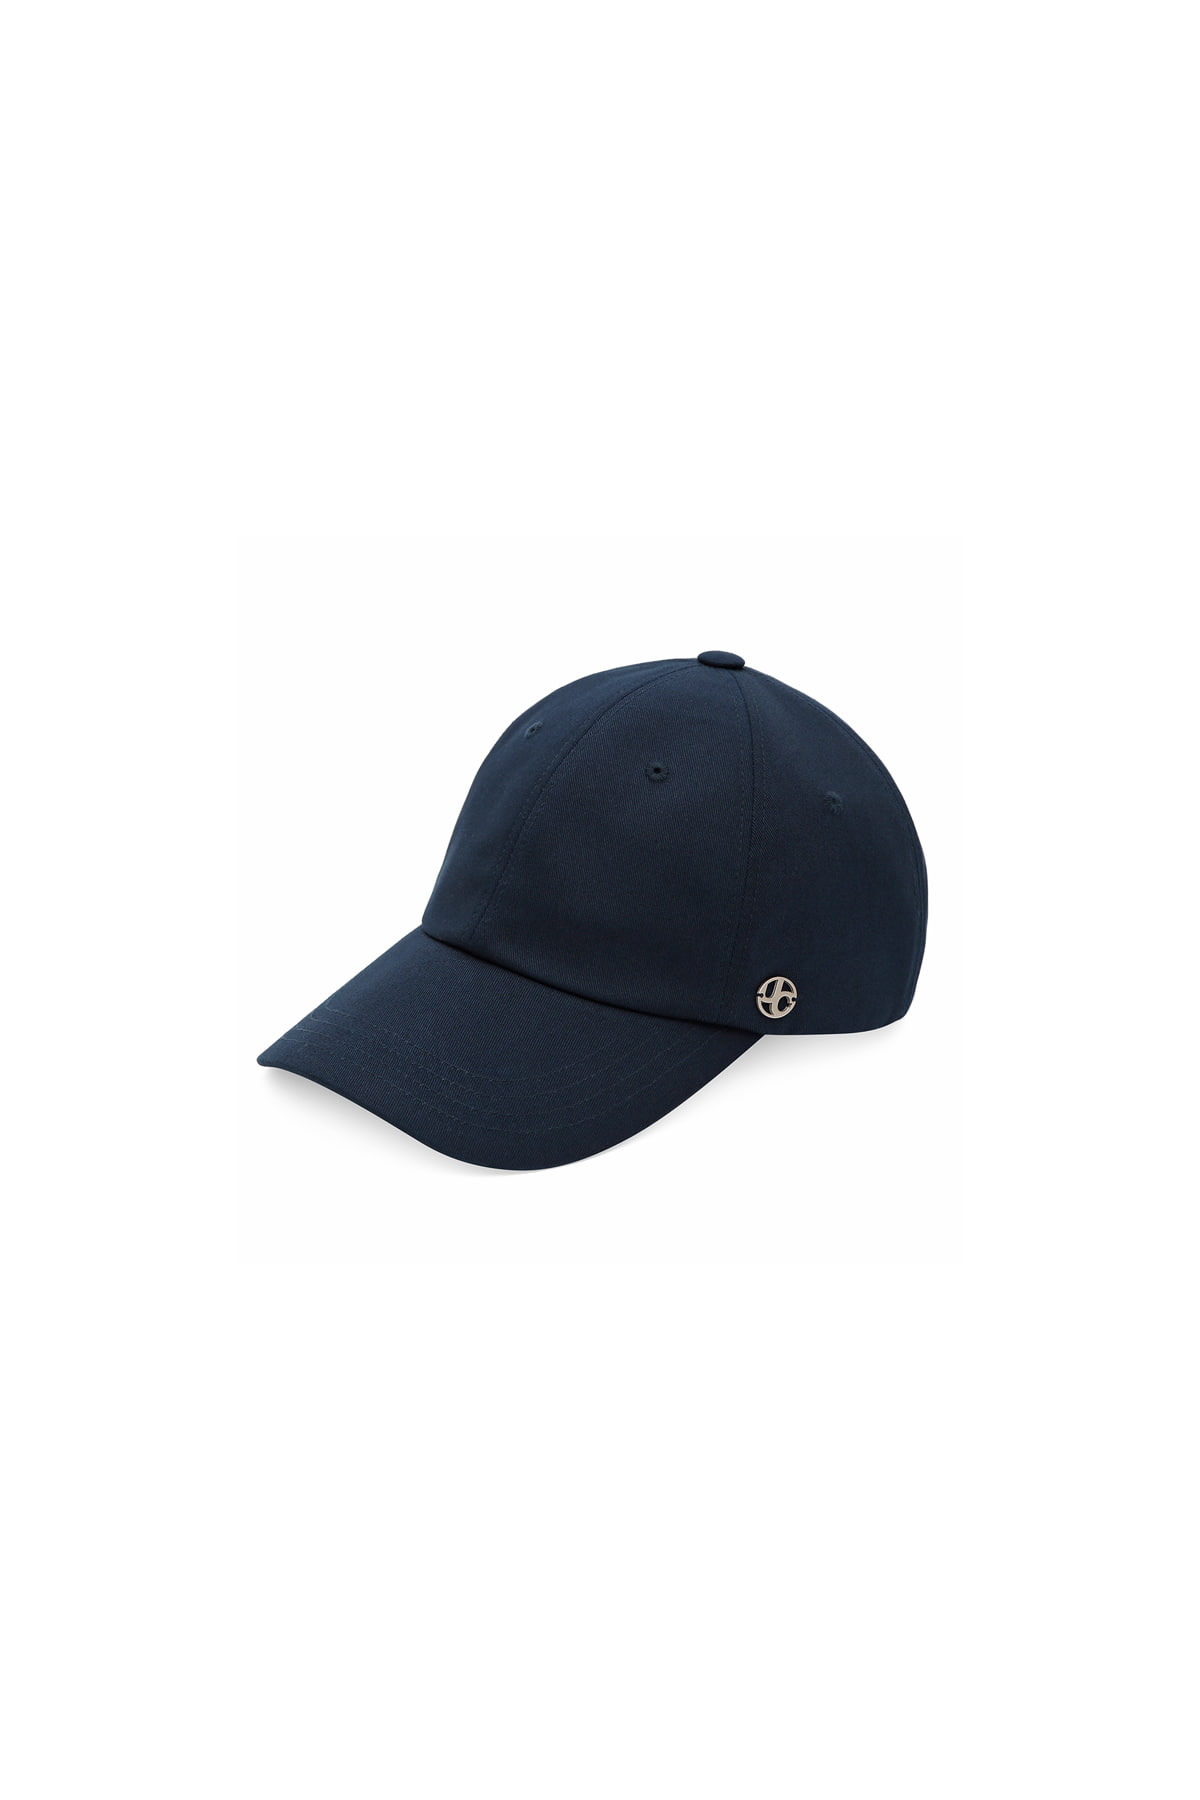 UC / OVER FIT BALL CAP / NV